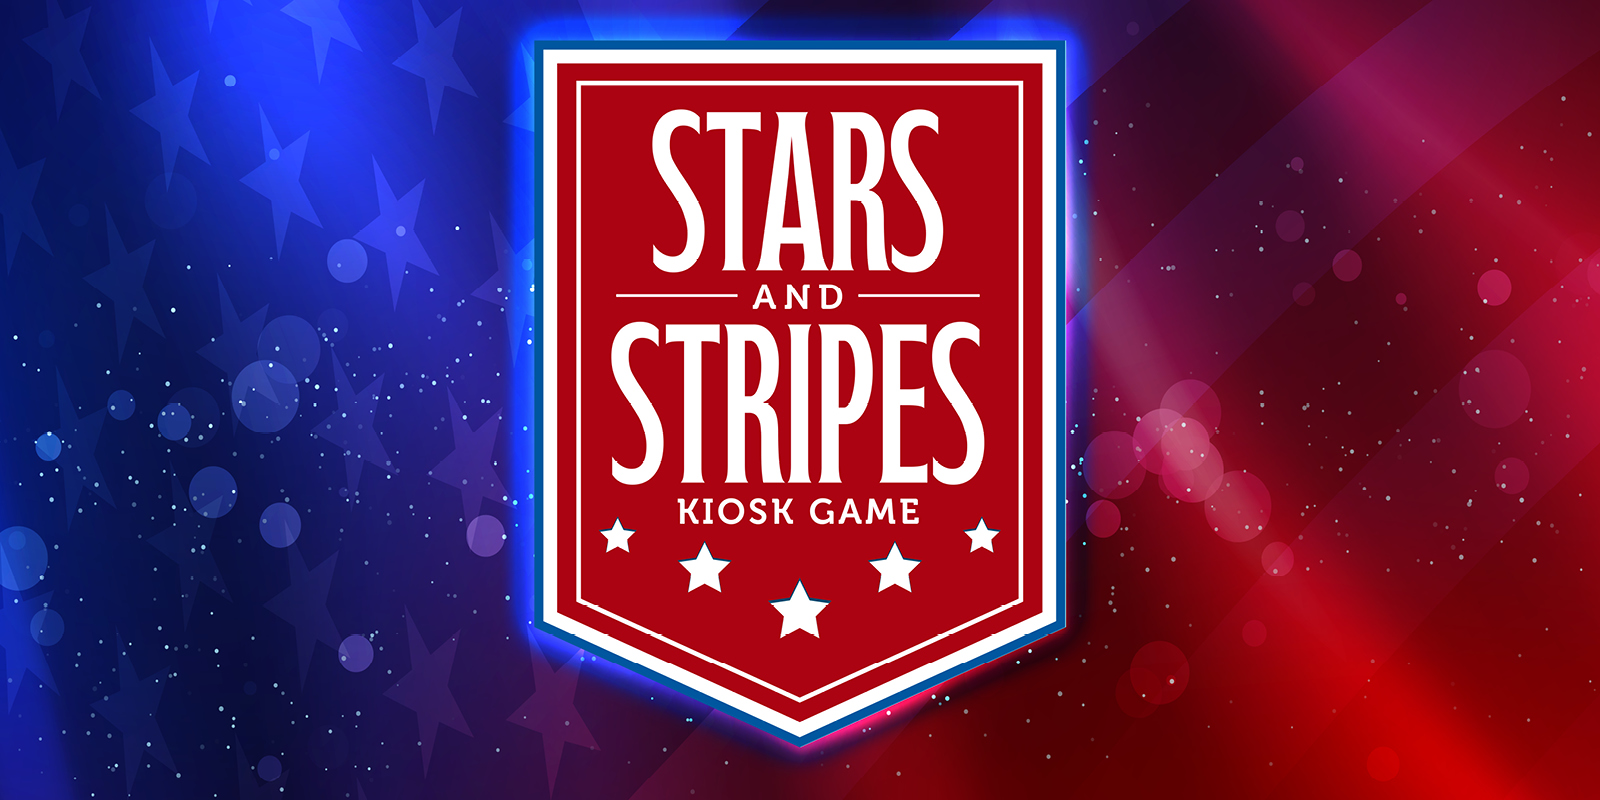 Stars and Strips Kiosk Game - Creative has an American flag in the background with a red banner in the middle.